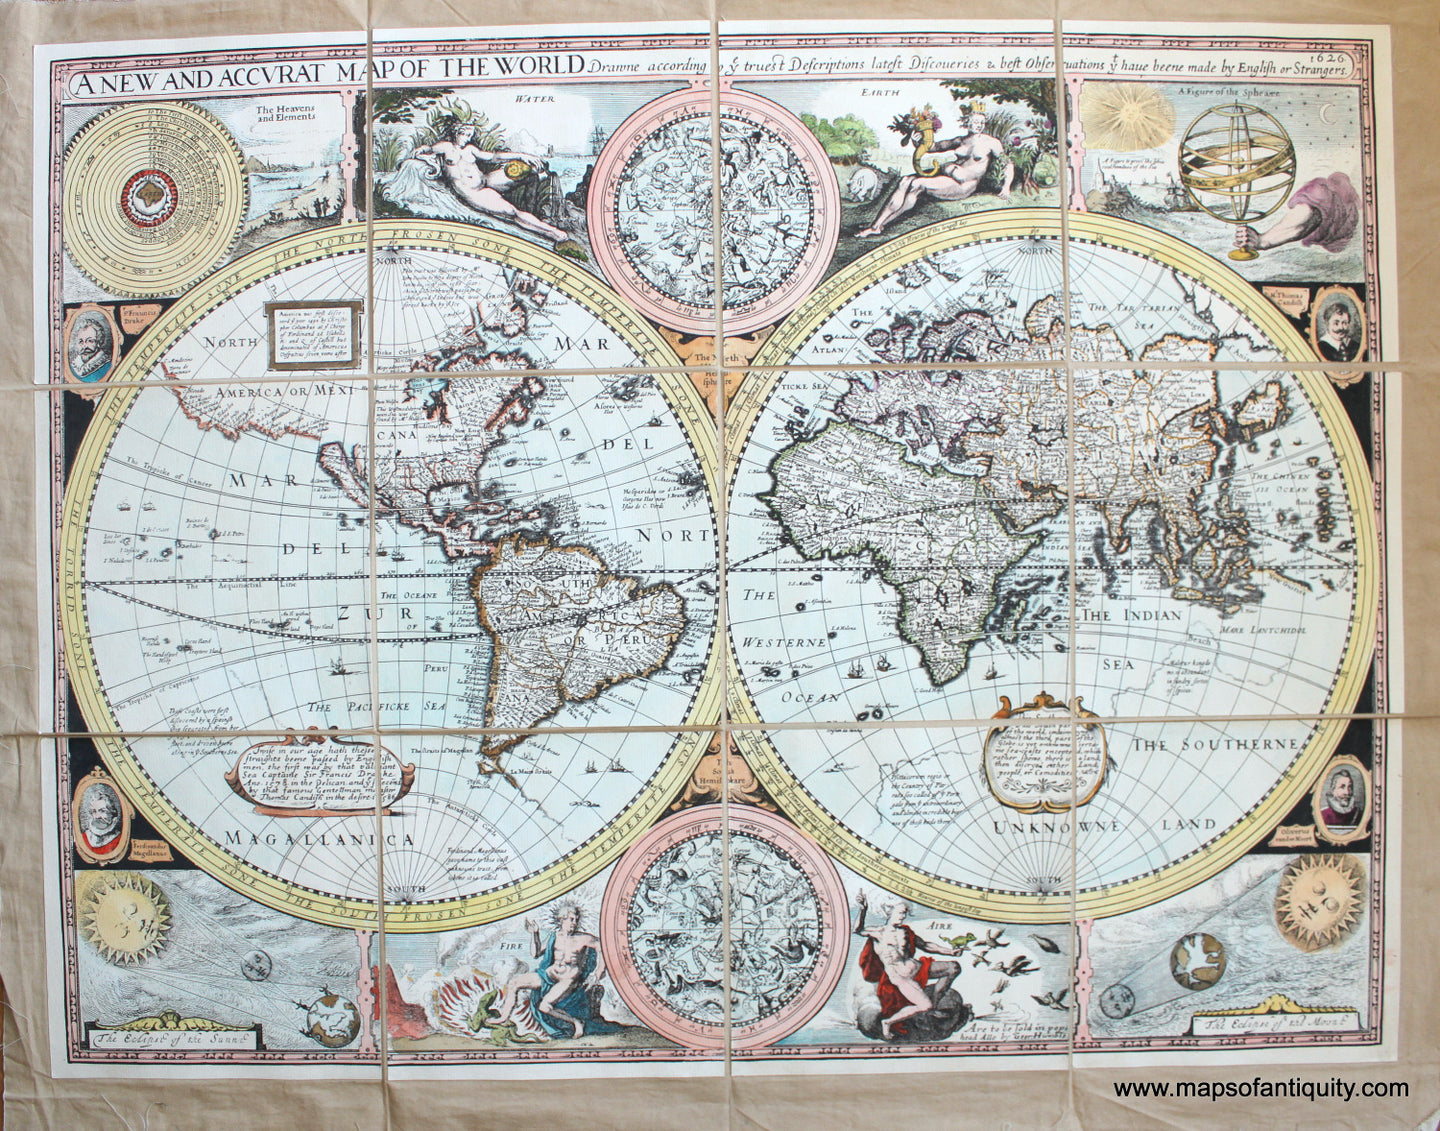 High-quality-Reproduction-A-New-and-Accurat-Map-of-the-World-Drawne-according-to-ye-truest-Descriptions-latest-Discoveries-&-best-Observations-yt-have-beene-made-by-English-or-Strangers-1626---Reproduction-Reproductions---Reproduction-Maps-Of-Antiquity